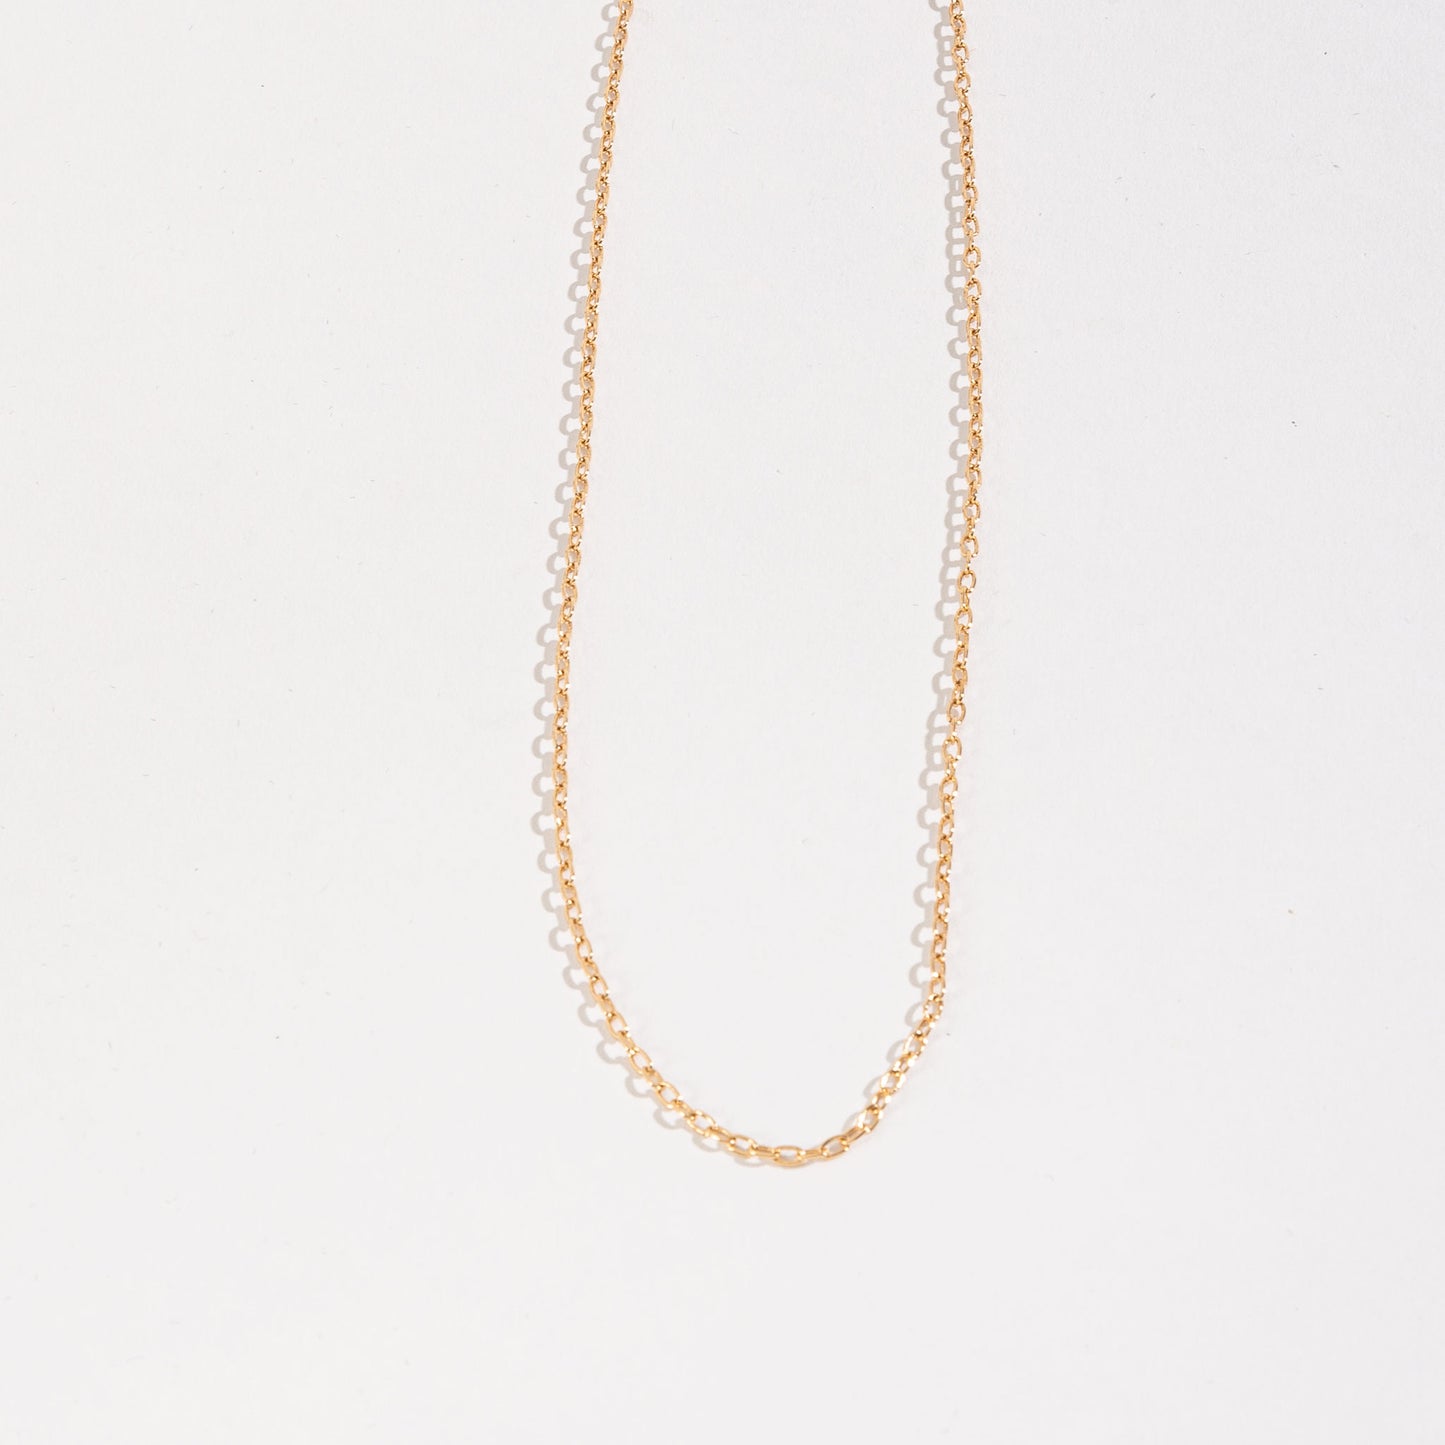 16" Oval Necklace Chain